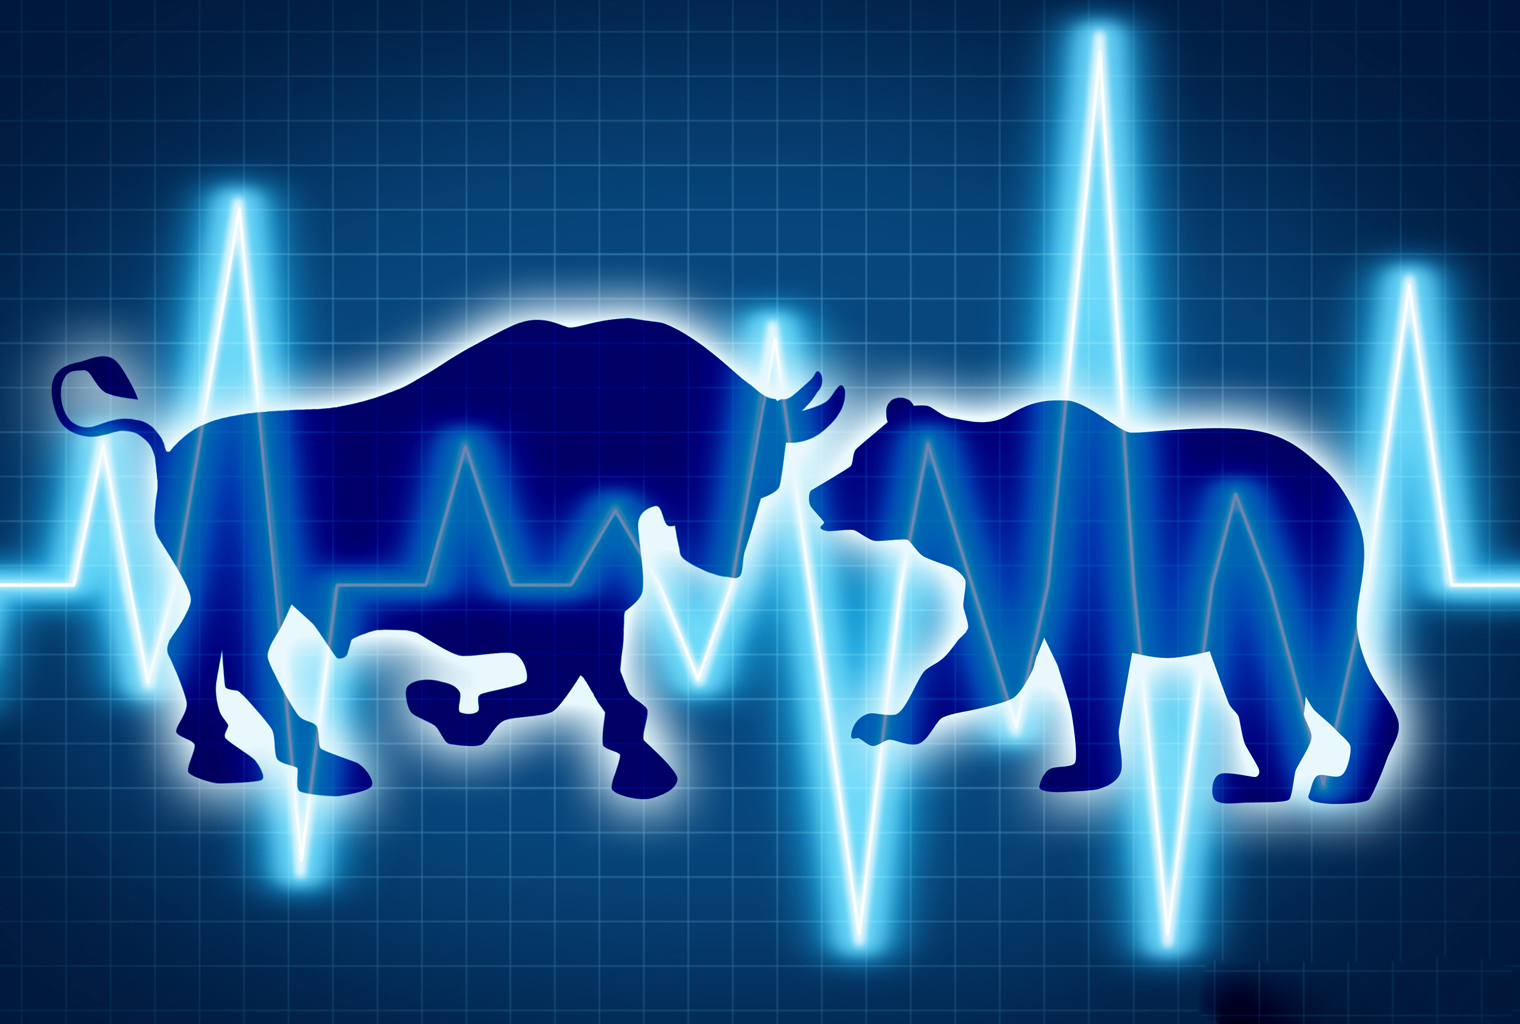 Market Update: Crypto Prices Hold Steady After Massive Bullish Spike